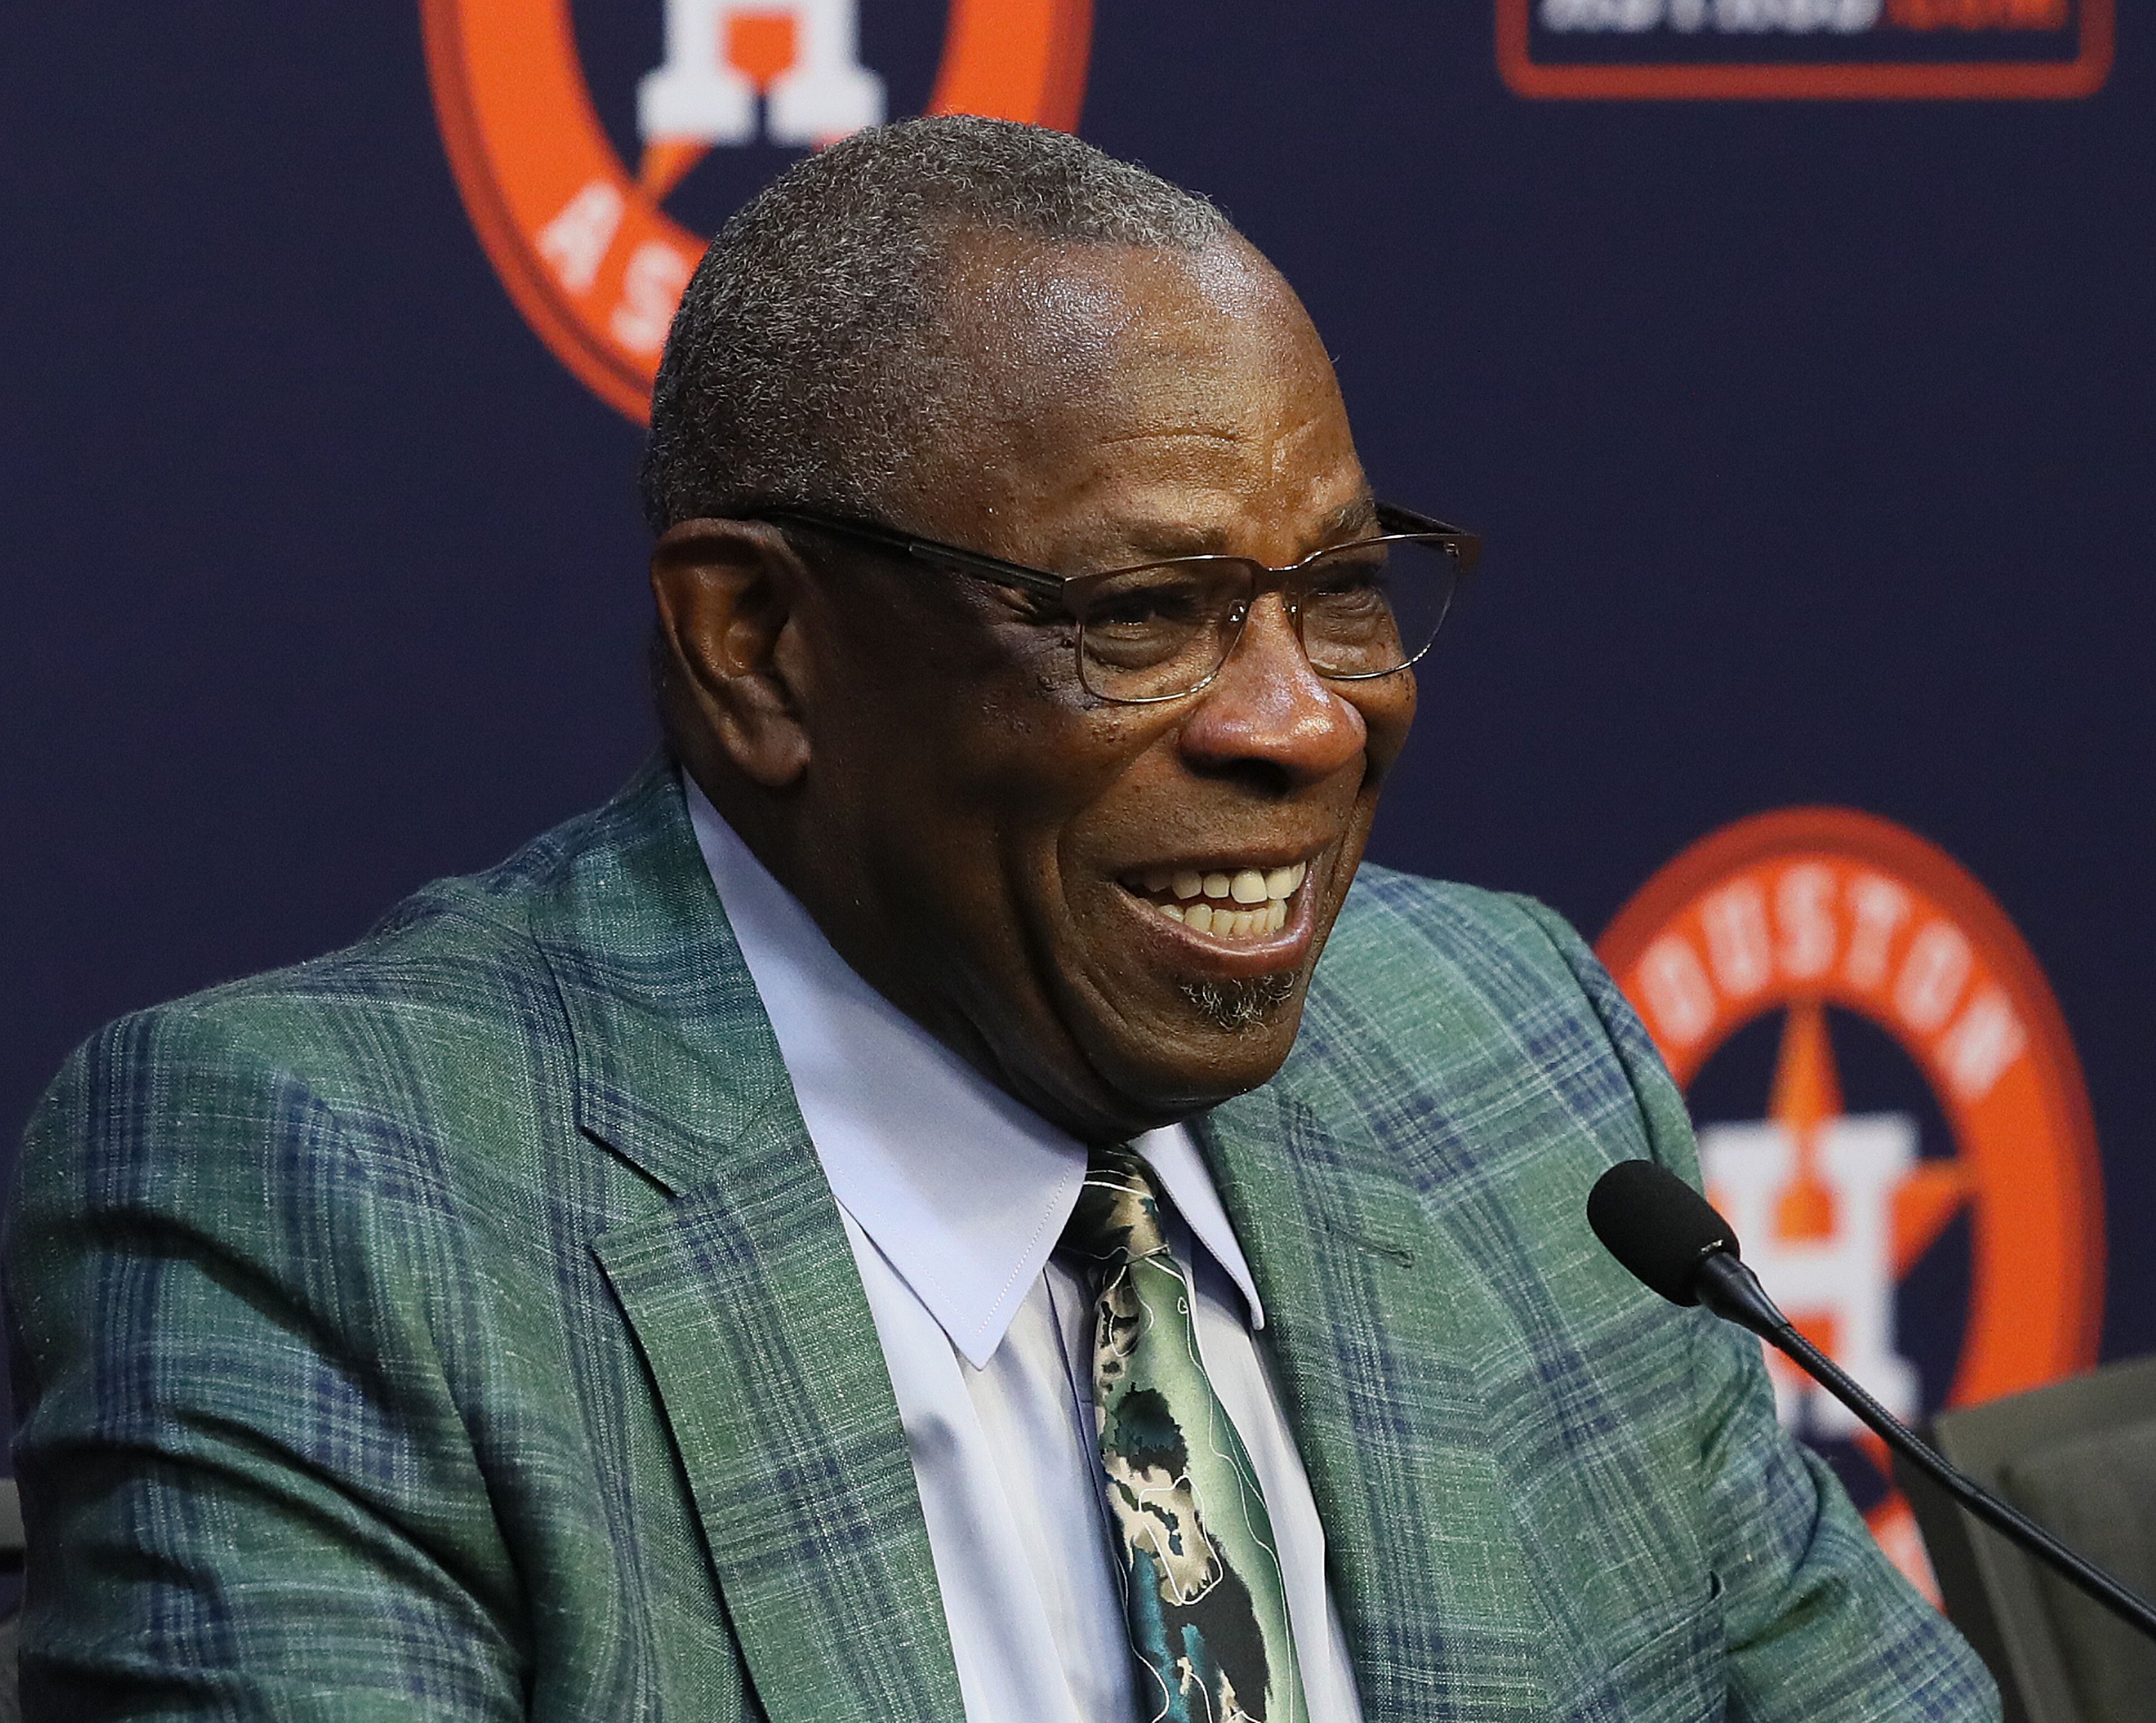 Newswire:Dusty Baker relishes first World Series title with